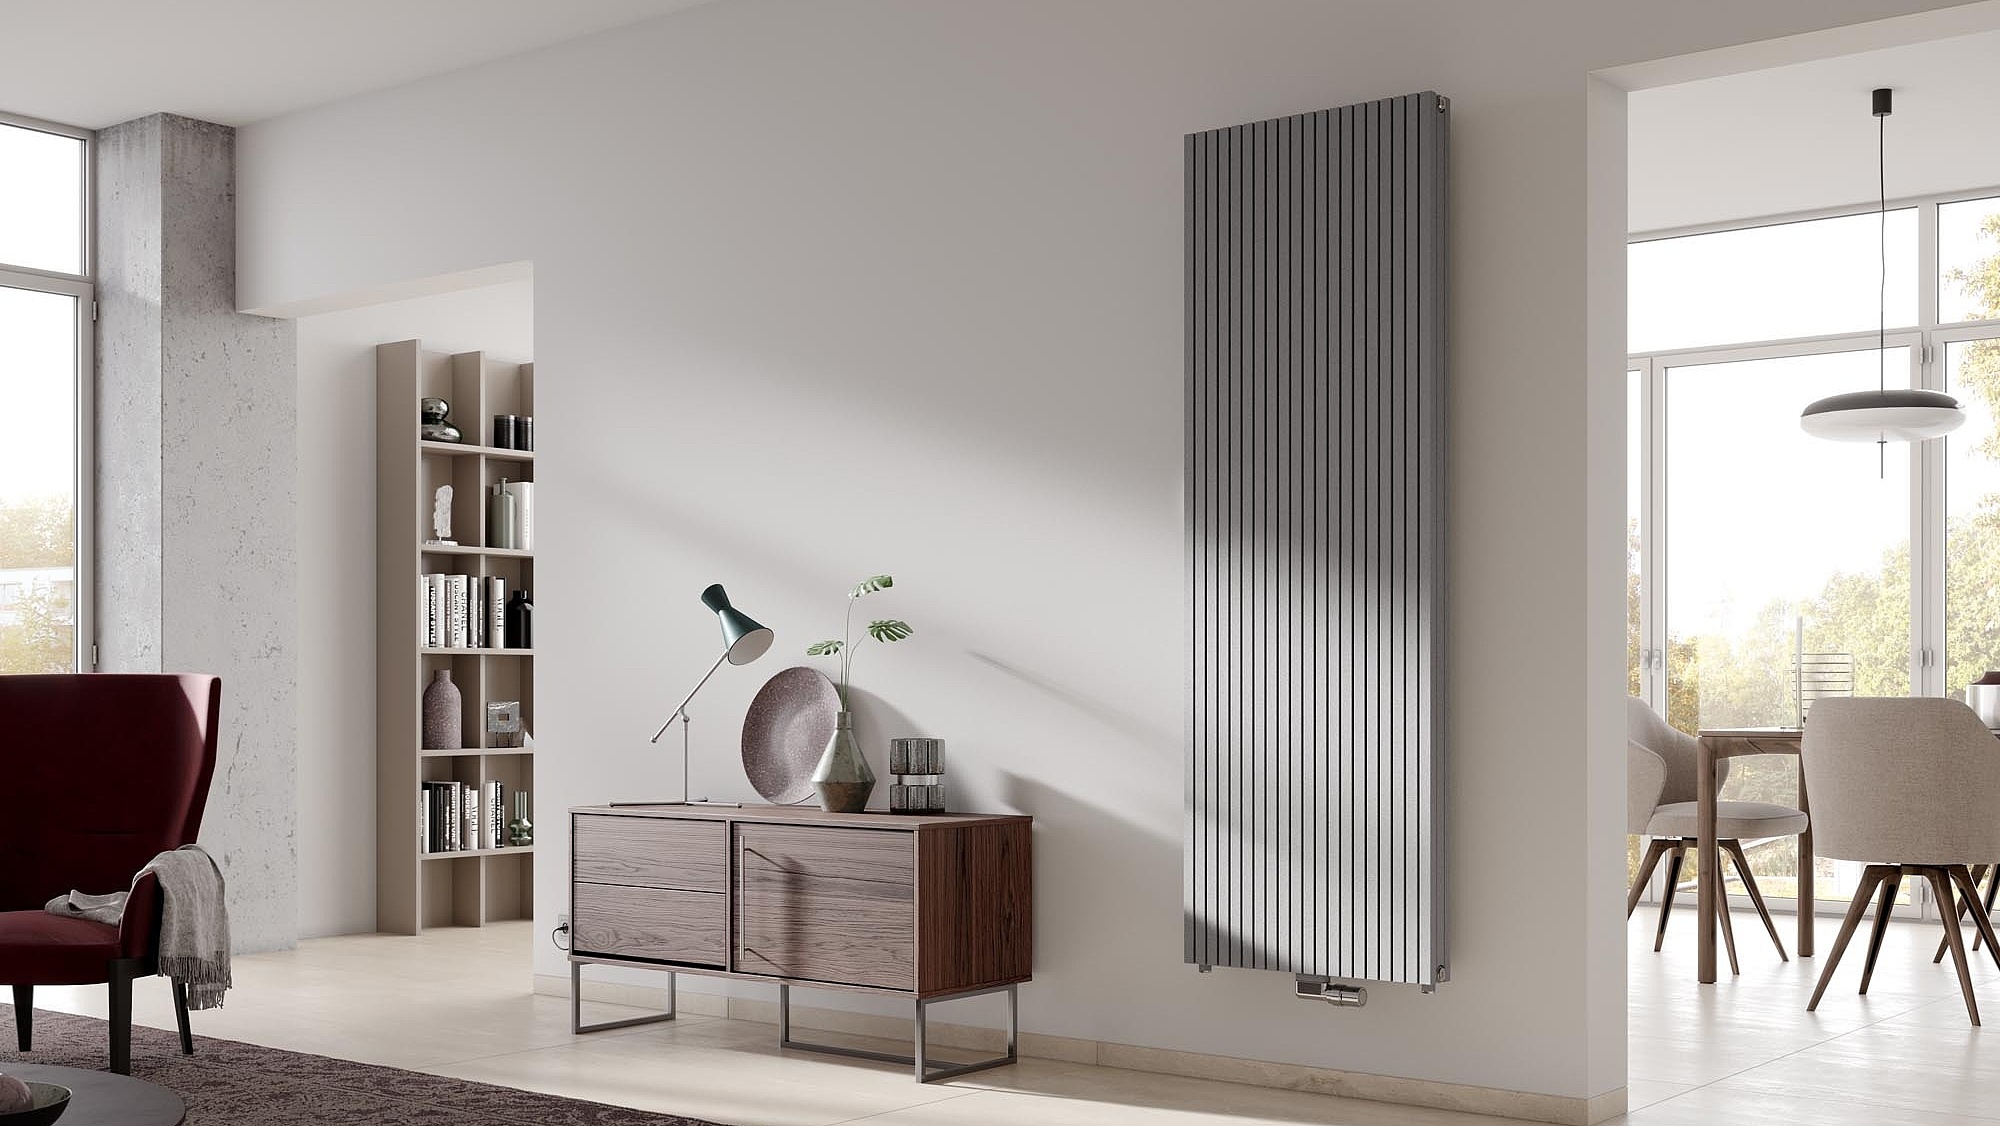 The Kermi Decor-Arte Pure design and bathroom radiator is available in many different heights and lengths.